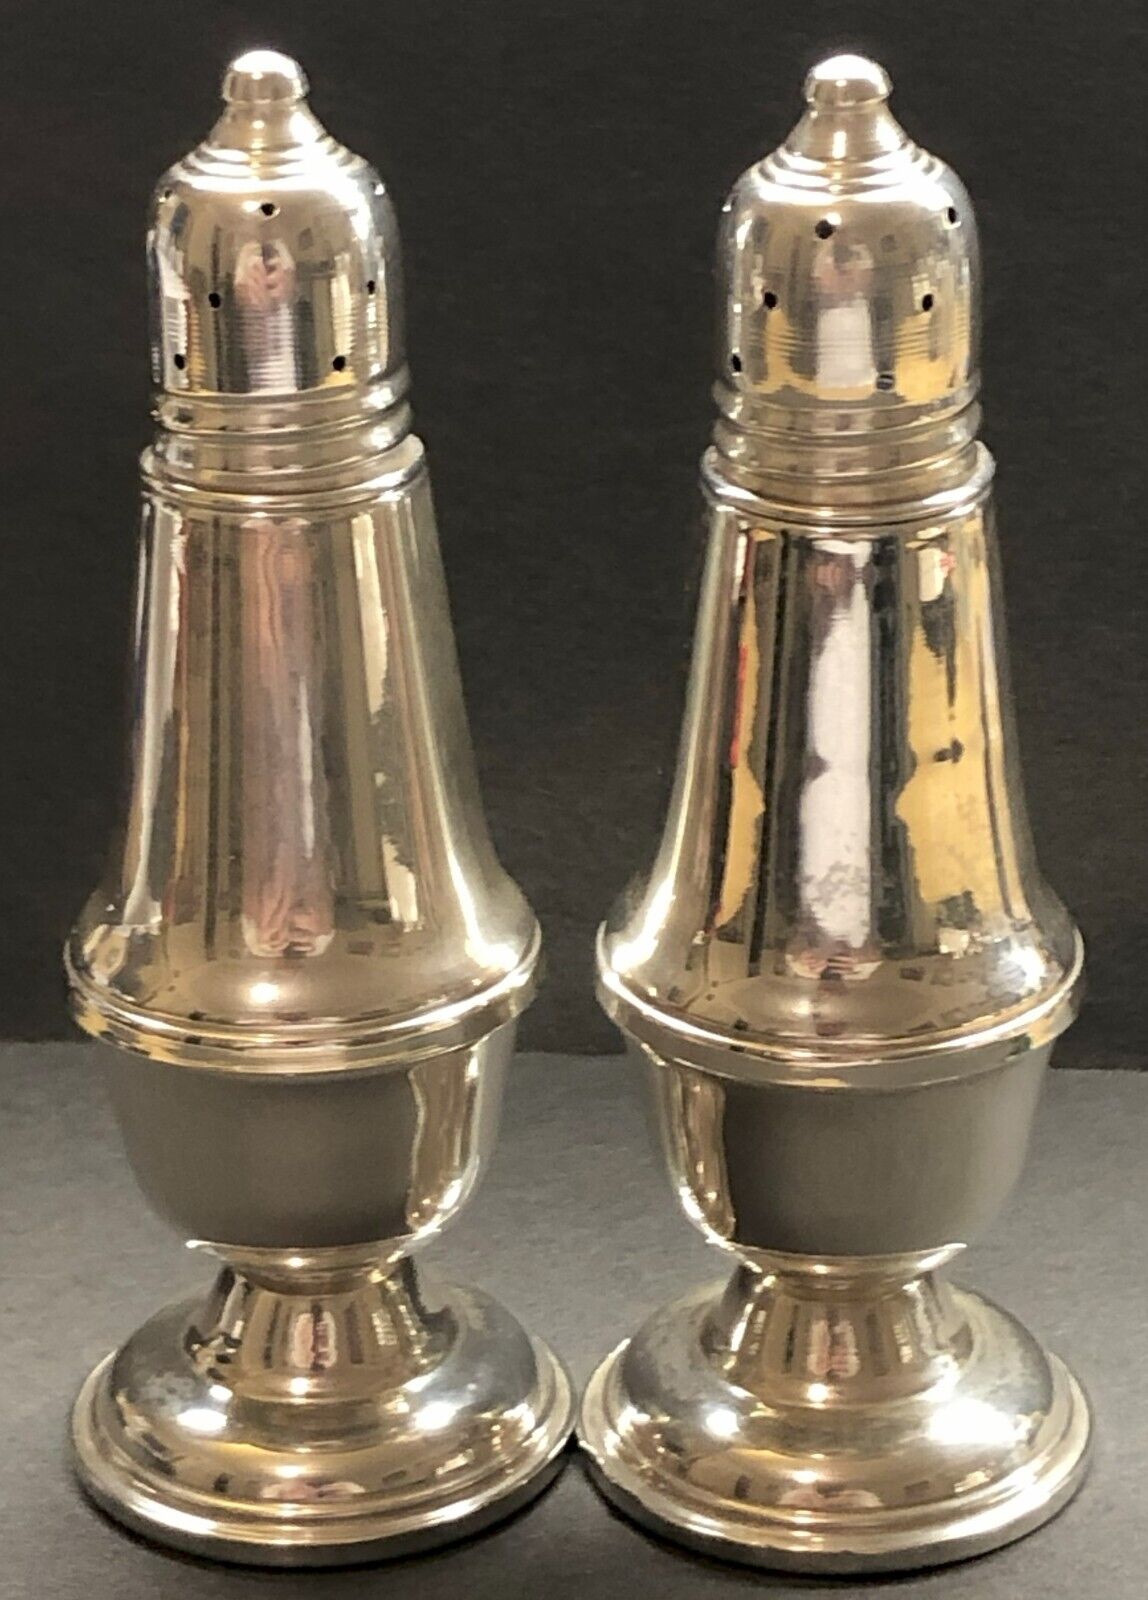 VINTAGE/ANTIQUE STERLING SILVER SALT & PEPPER SHAKERS GLASS INSERT. 5INCHES